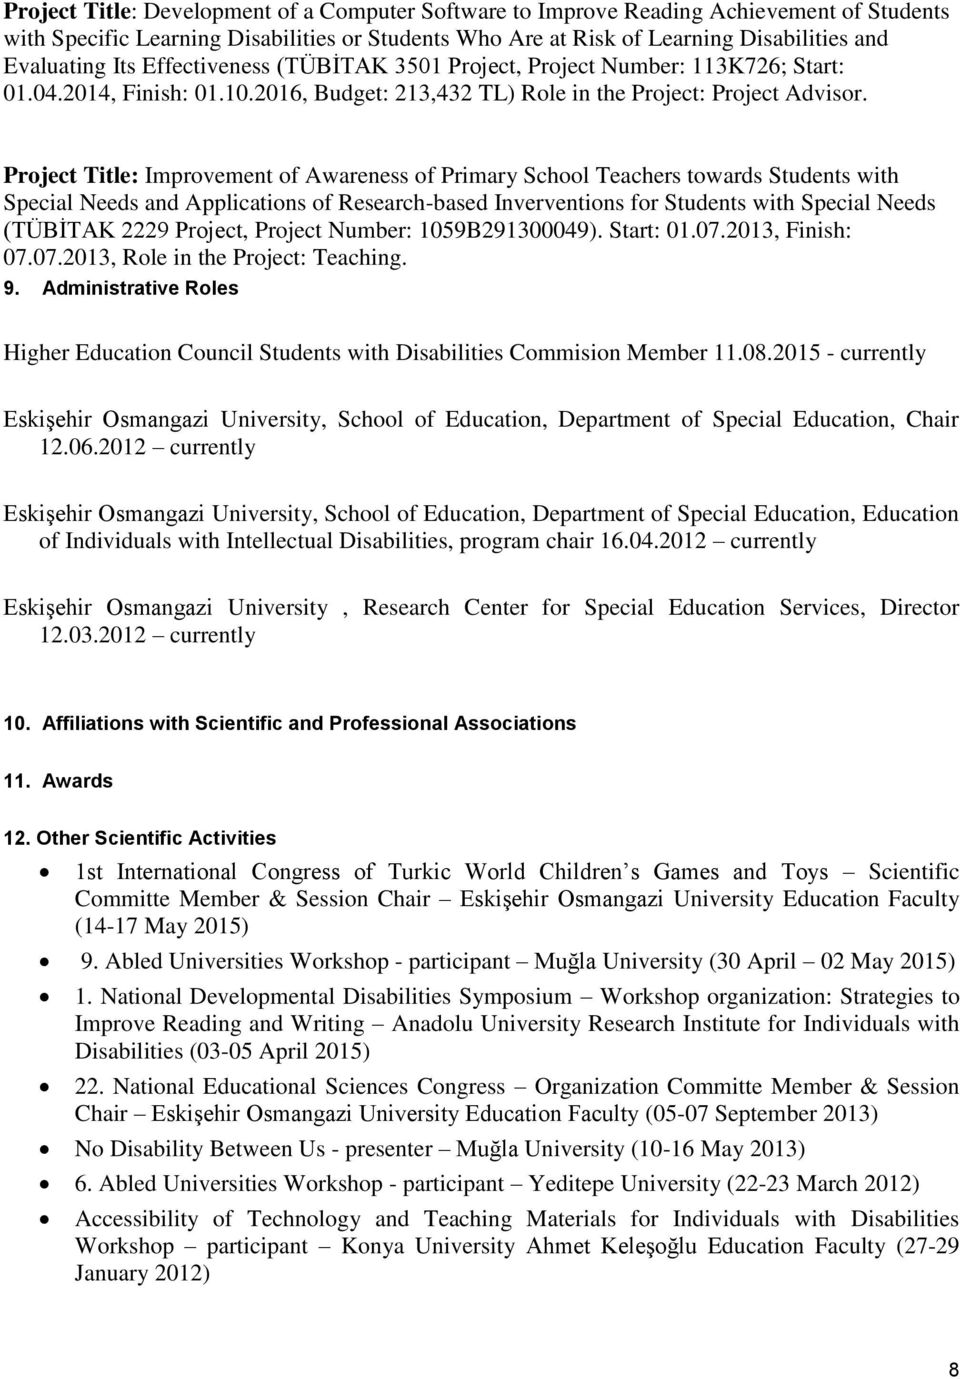 Project Title: Improvement of Awareness of Primary School Teachers towards Students with Special Needs and Applications of Research-based Inverventions for Students with Special Needs (TÜBİTAK 2229